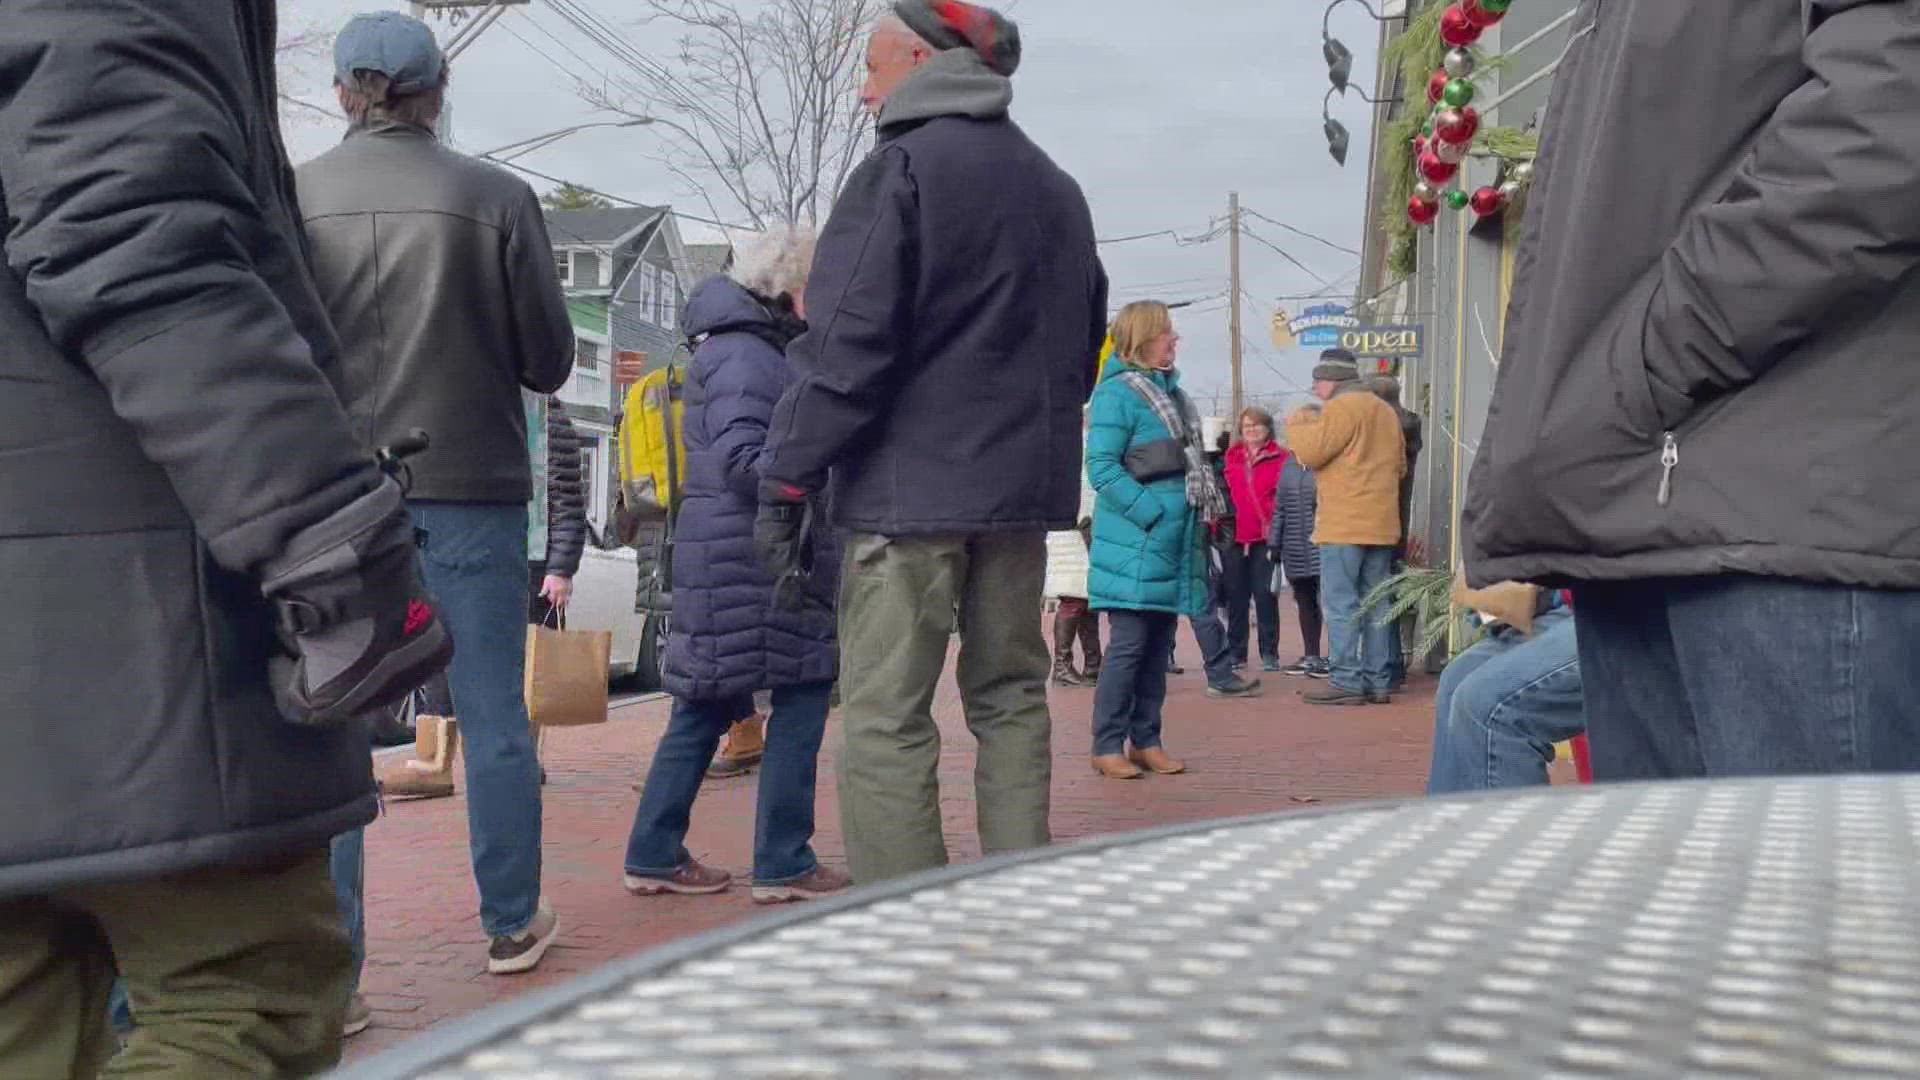 The weekend of Dec. 10 and 11 marked the 36th annual Christmas by the Sea celebration for the town of Ogunquit.